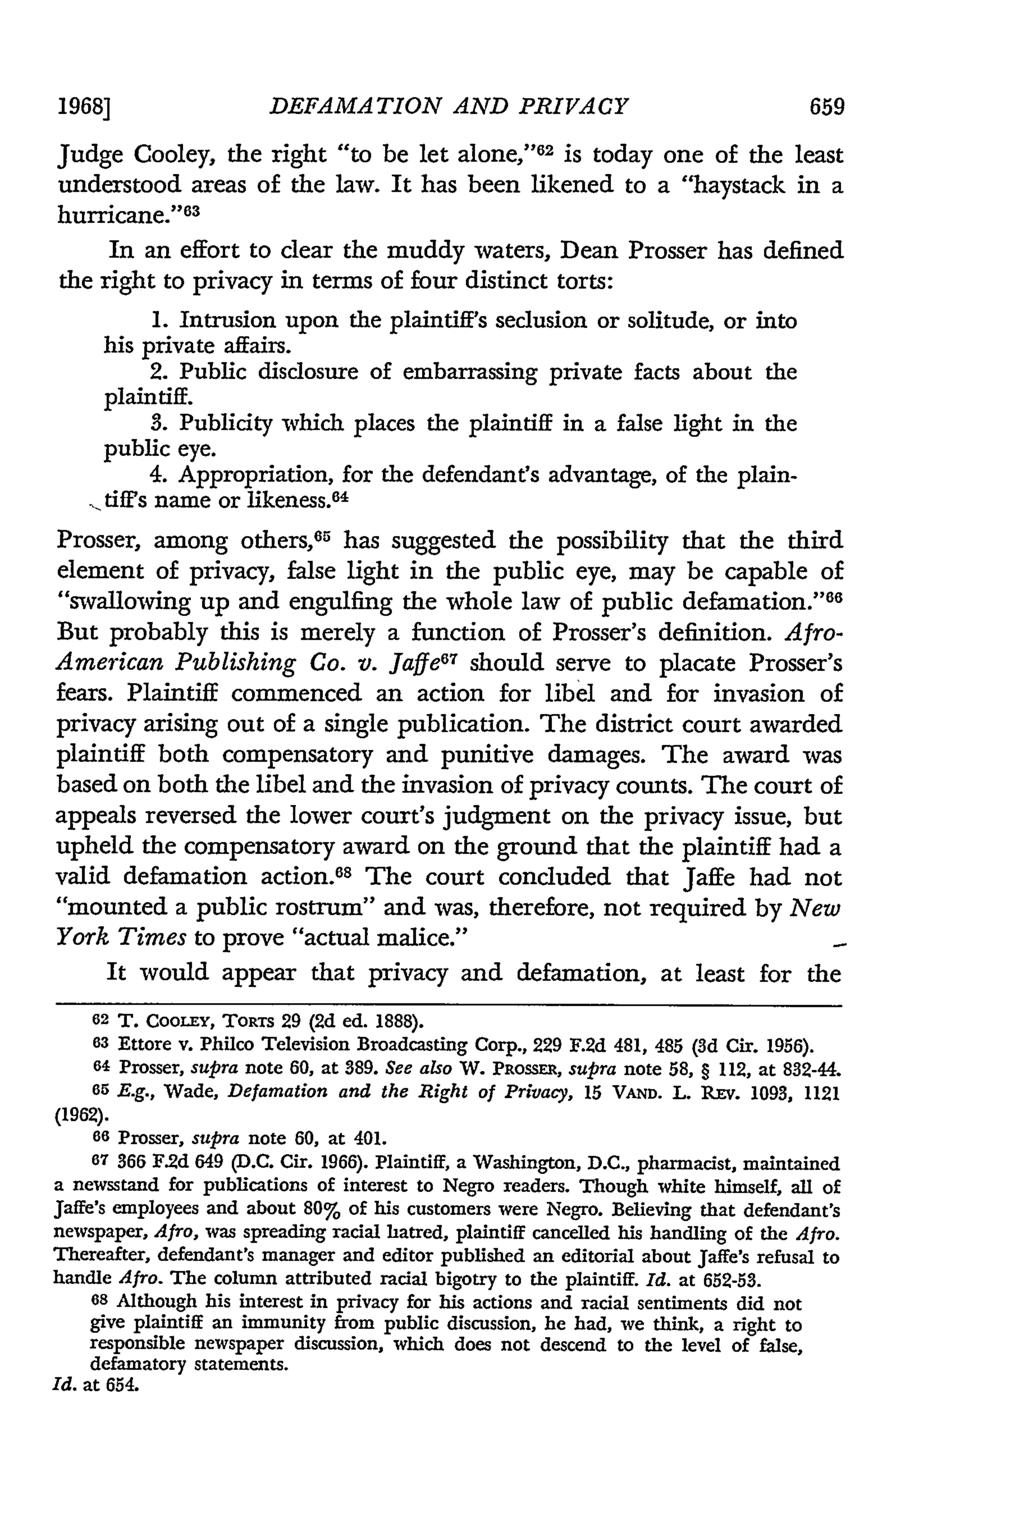 1968] DEFAMATION AND PRIVACY Judge Cooley, the right "to be let alone," 62 is today one of the least understood areas of the law. It has been likened to a "haystack in a hurricane.